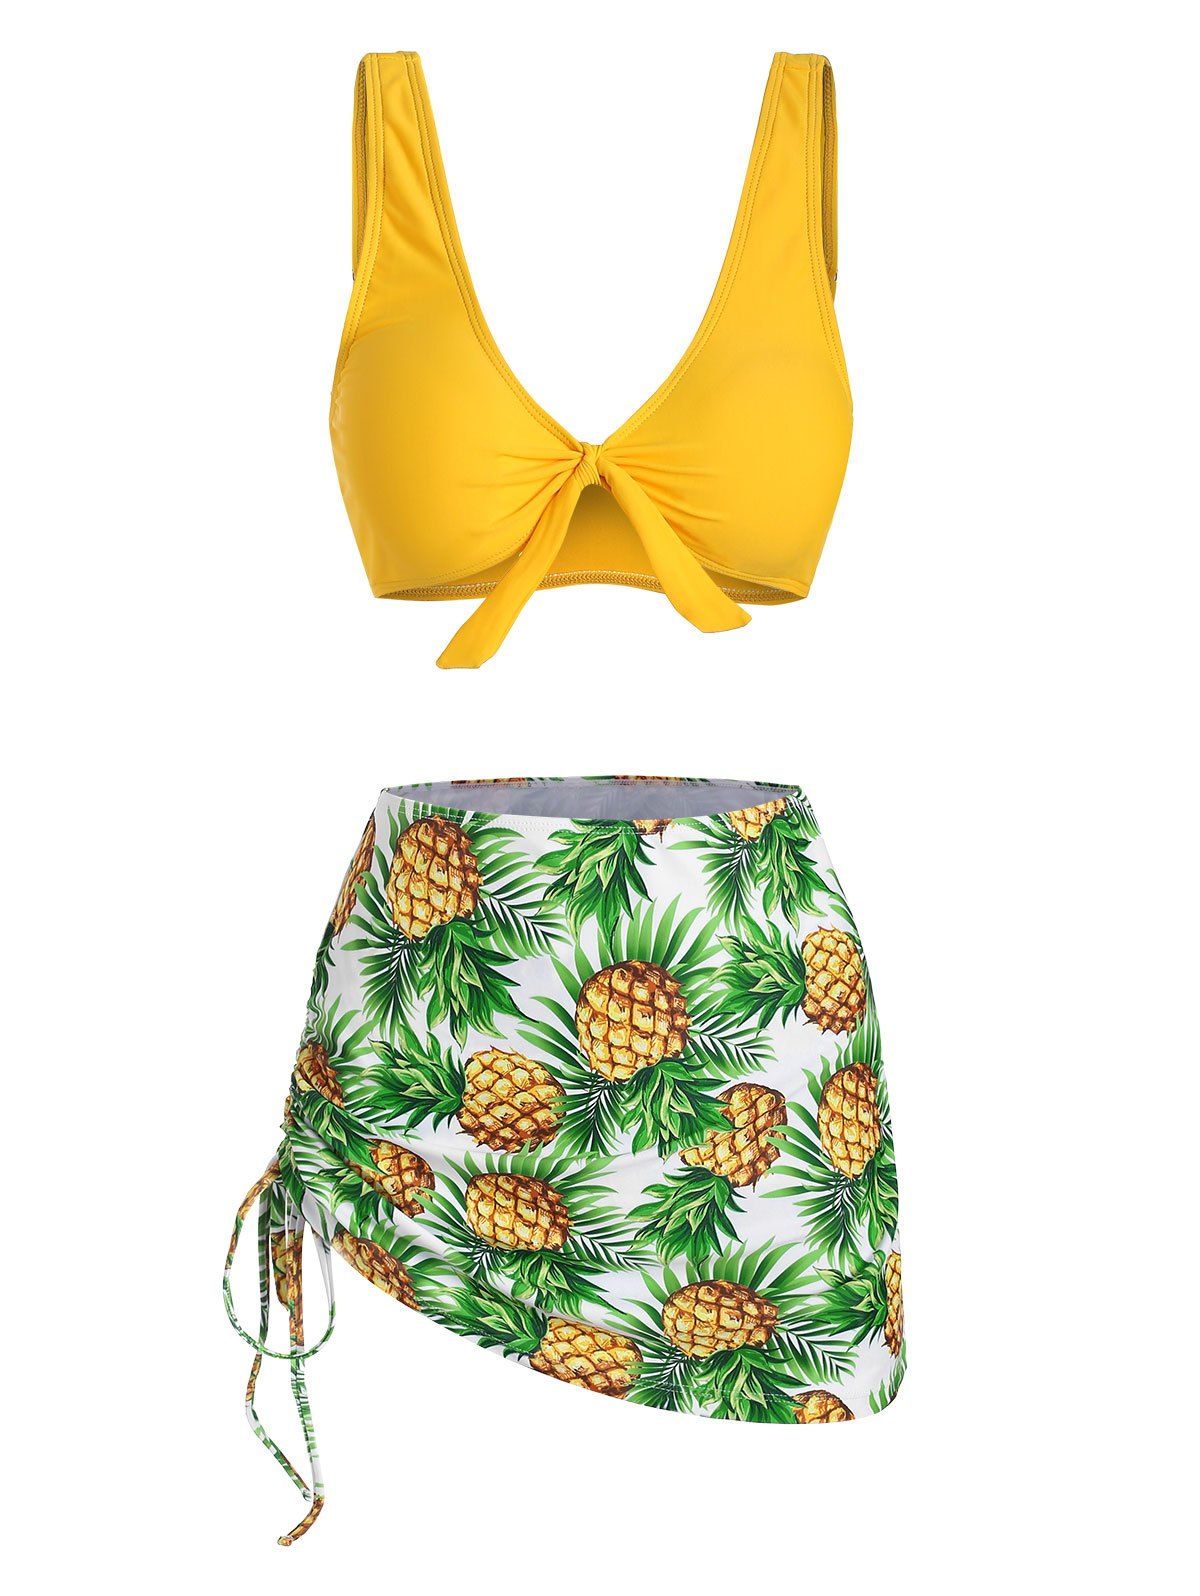 Pineapple Print Cinched Three Piece Swimsuit - BRIGHT YELLOW S